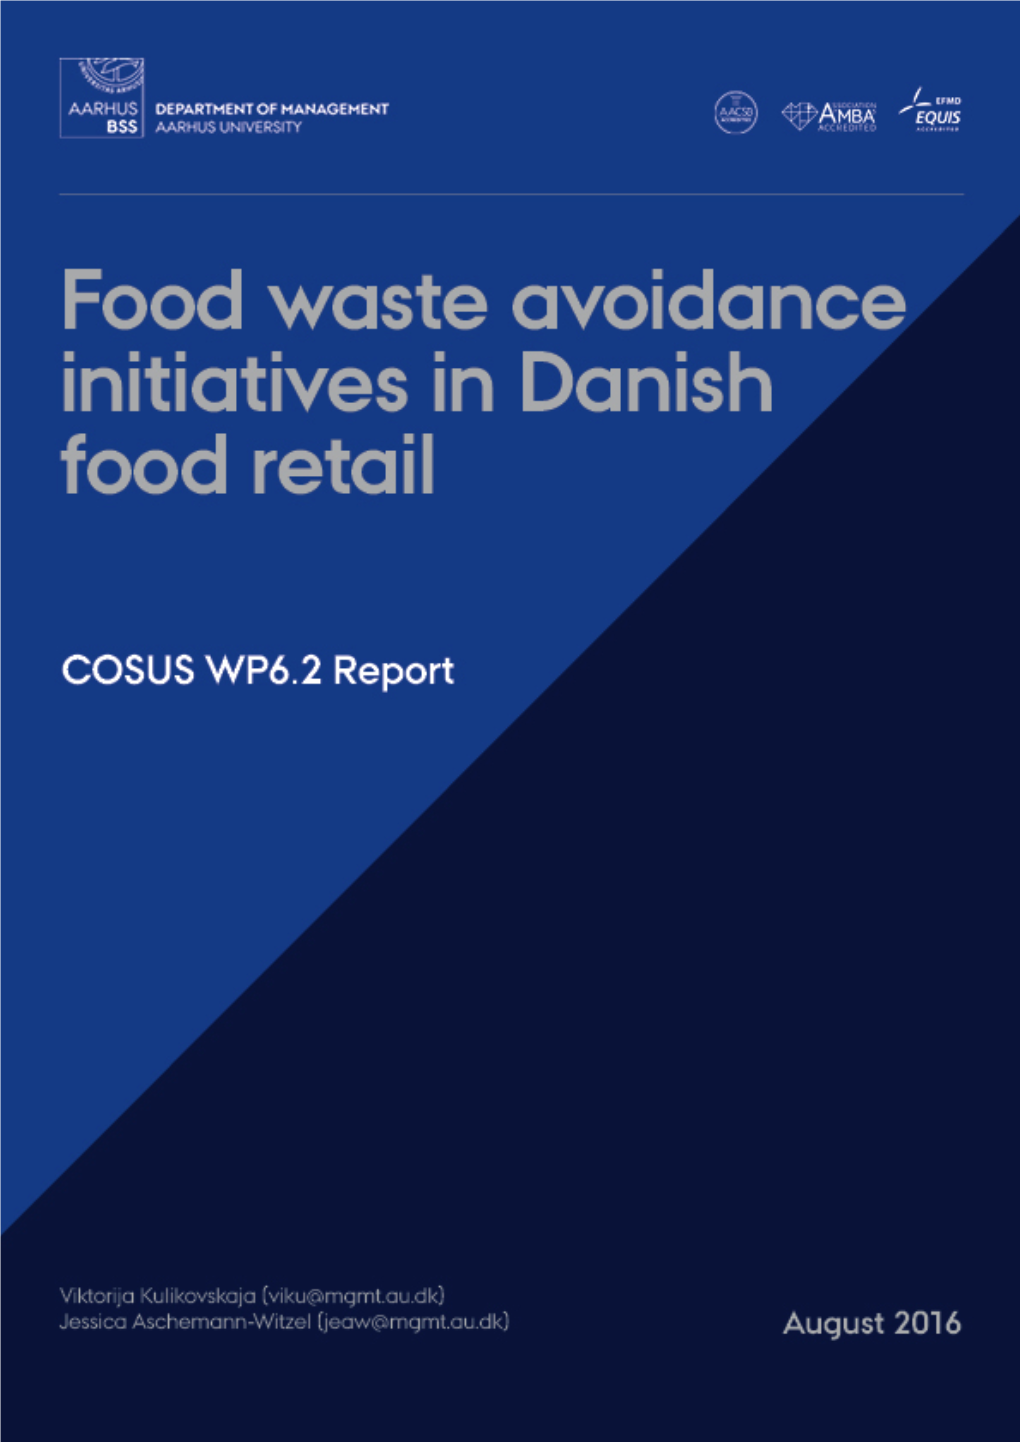 Food Waste Avoidance Initiatives in Danish Food Retail - Combined Results